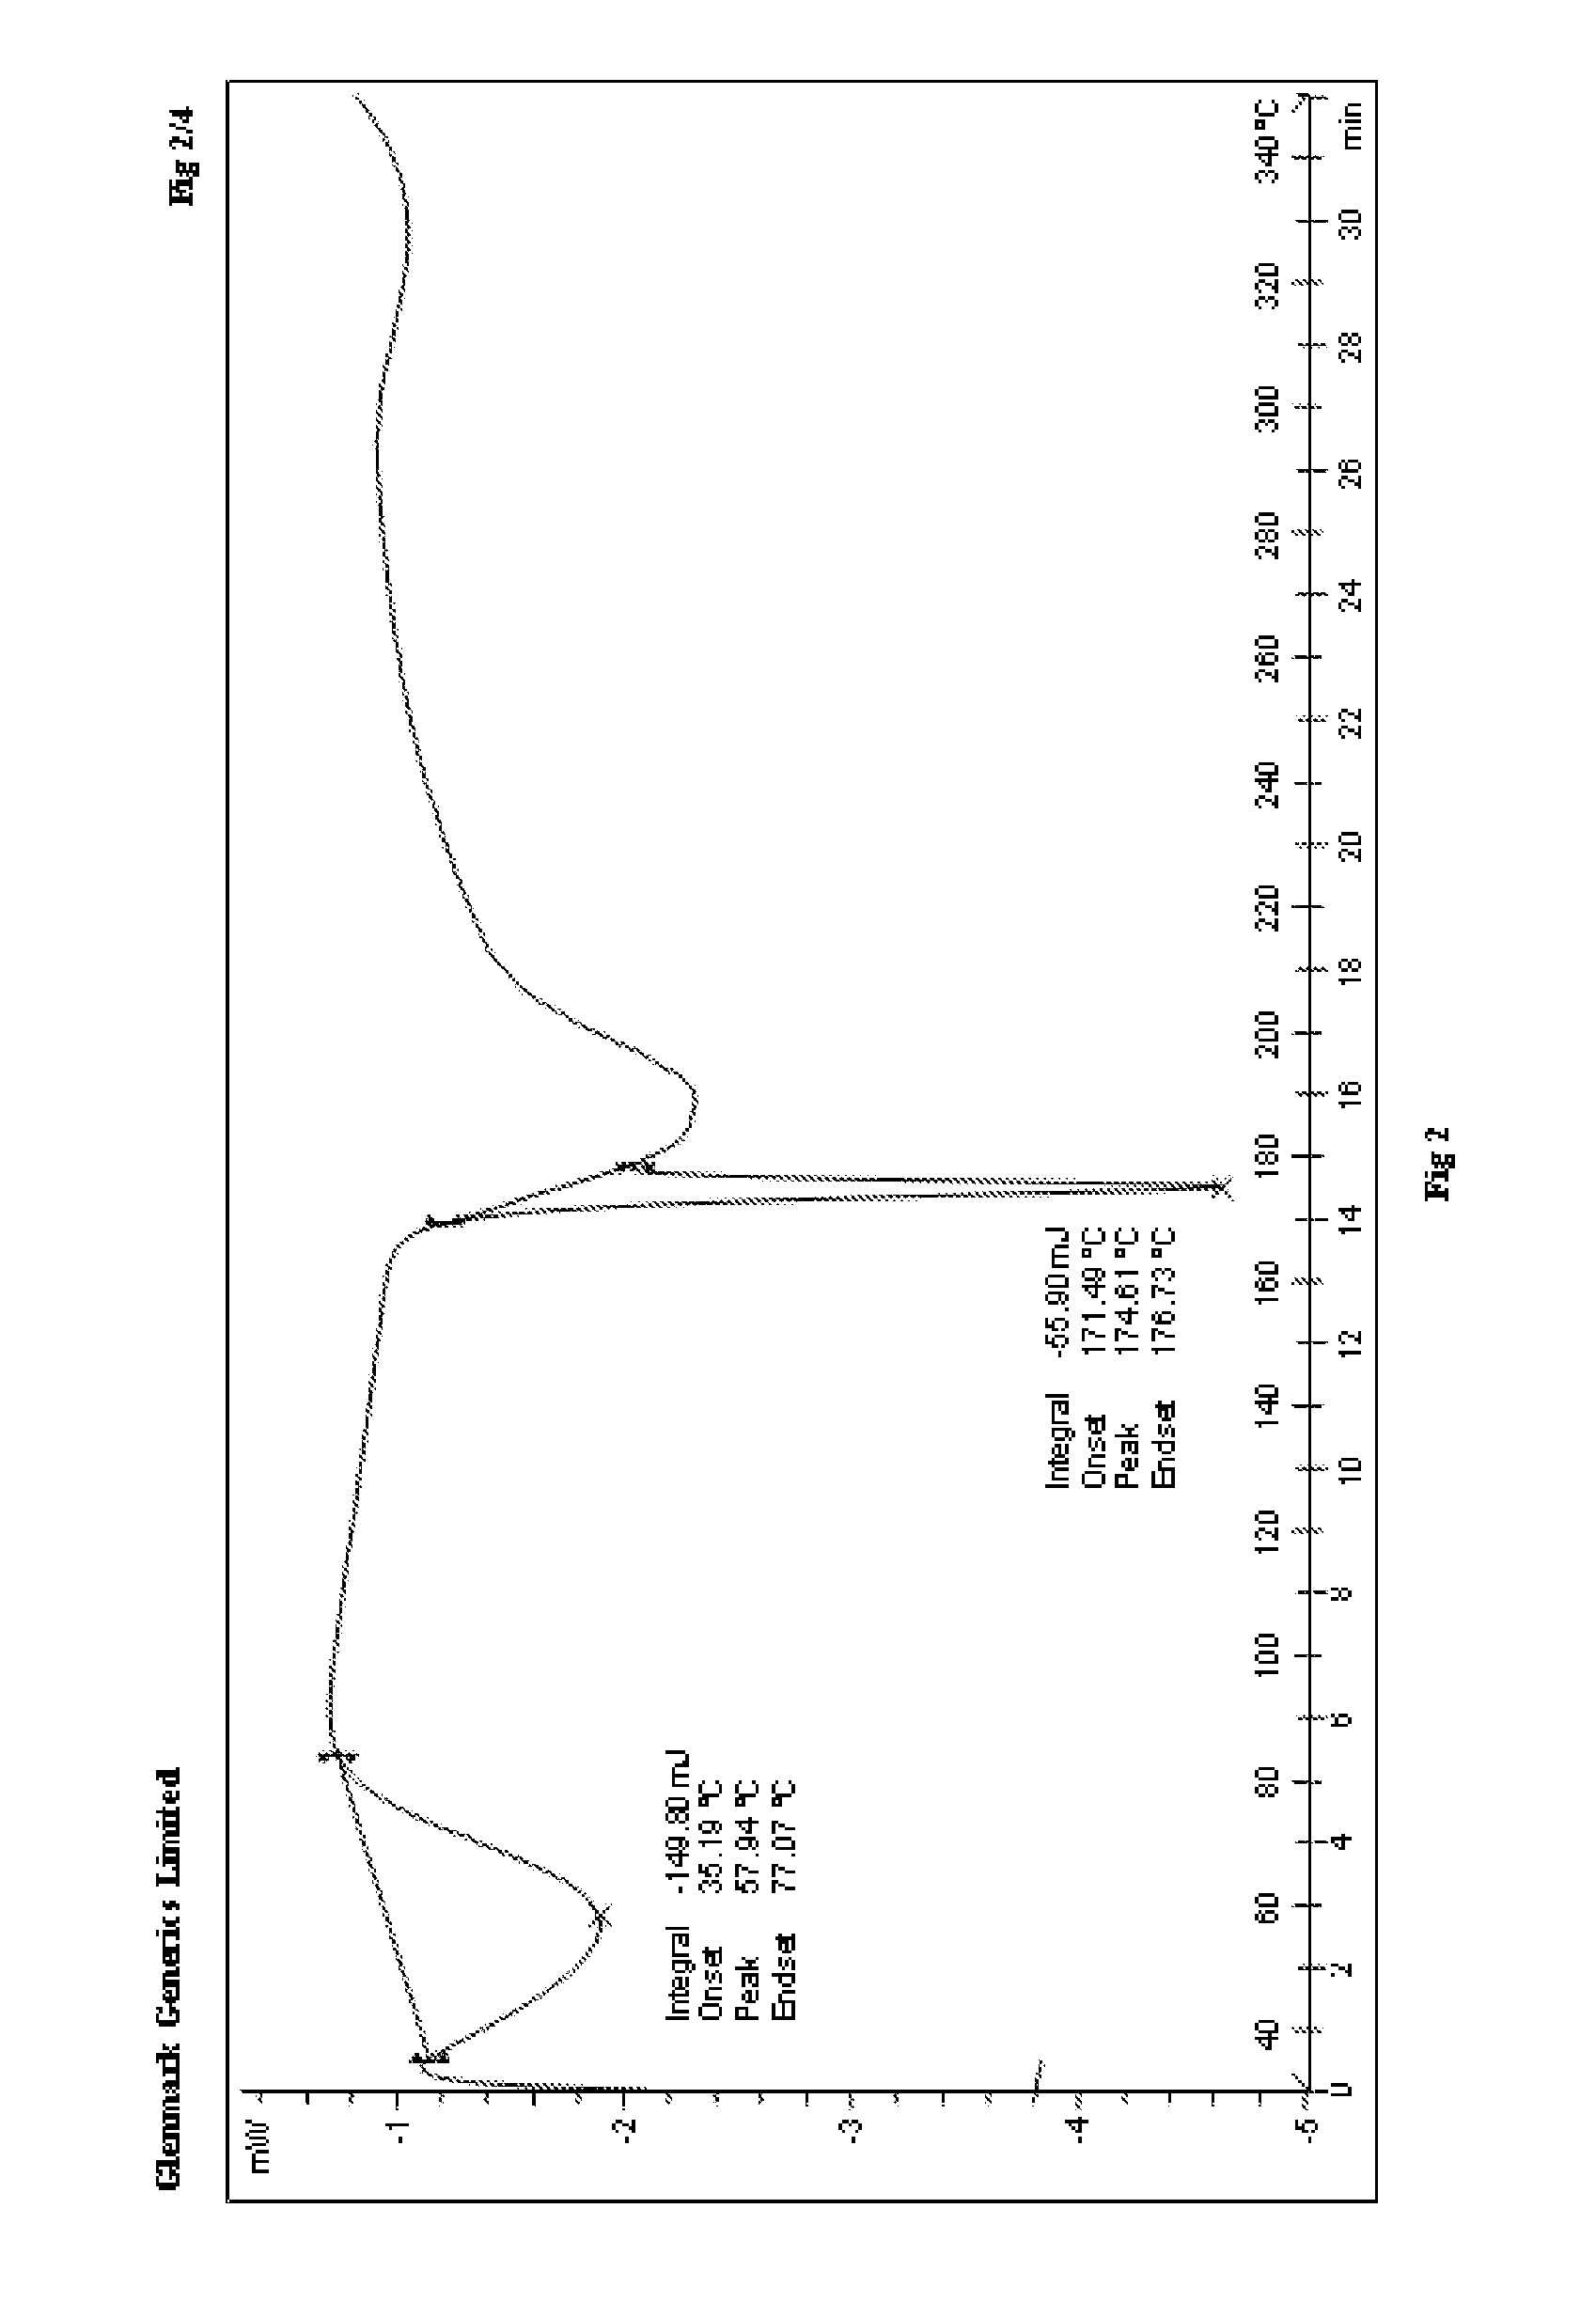 Process for the preparation of r-sitagliptin and its pharmaceutically acceptable salts thereof